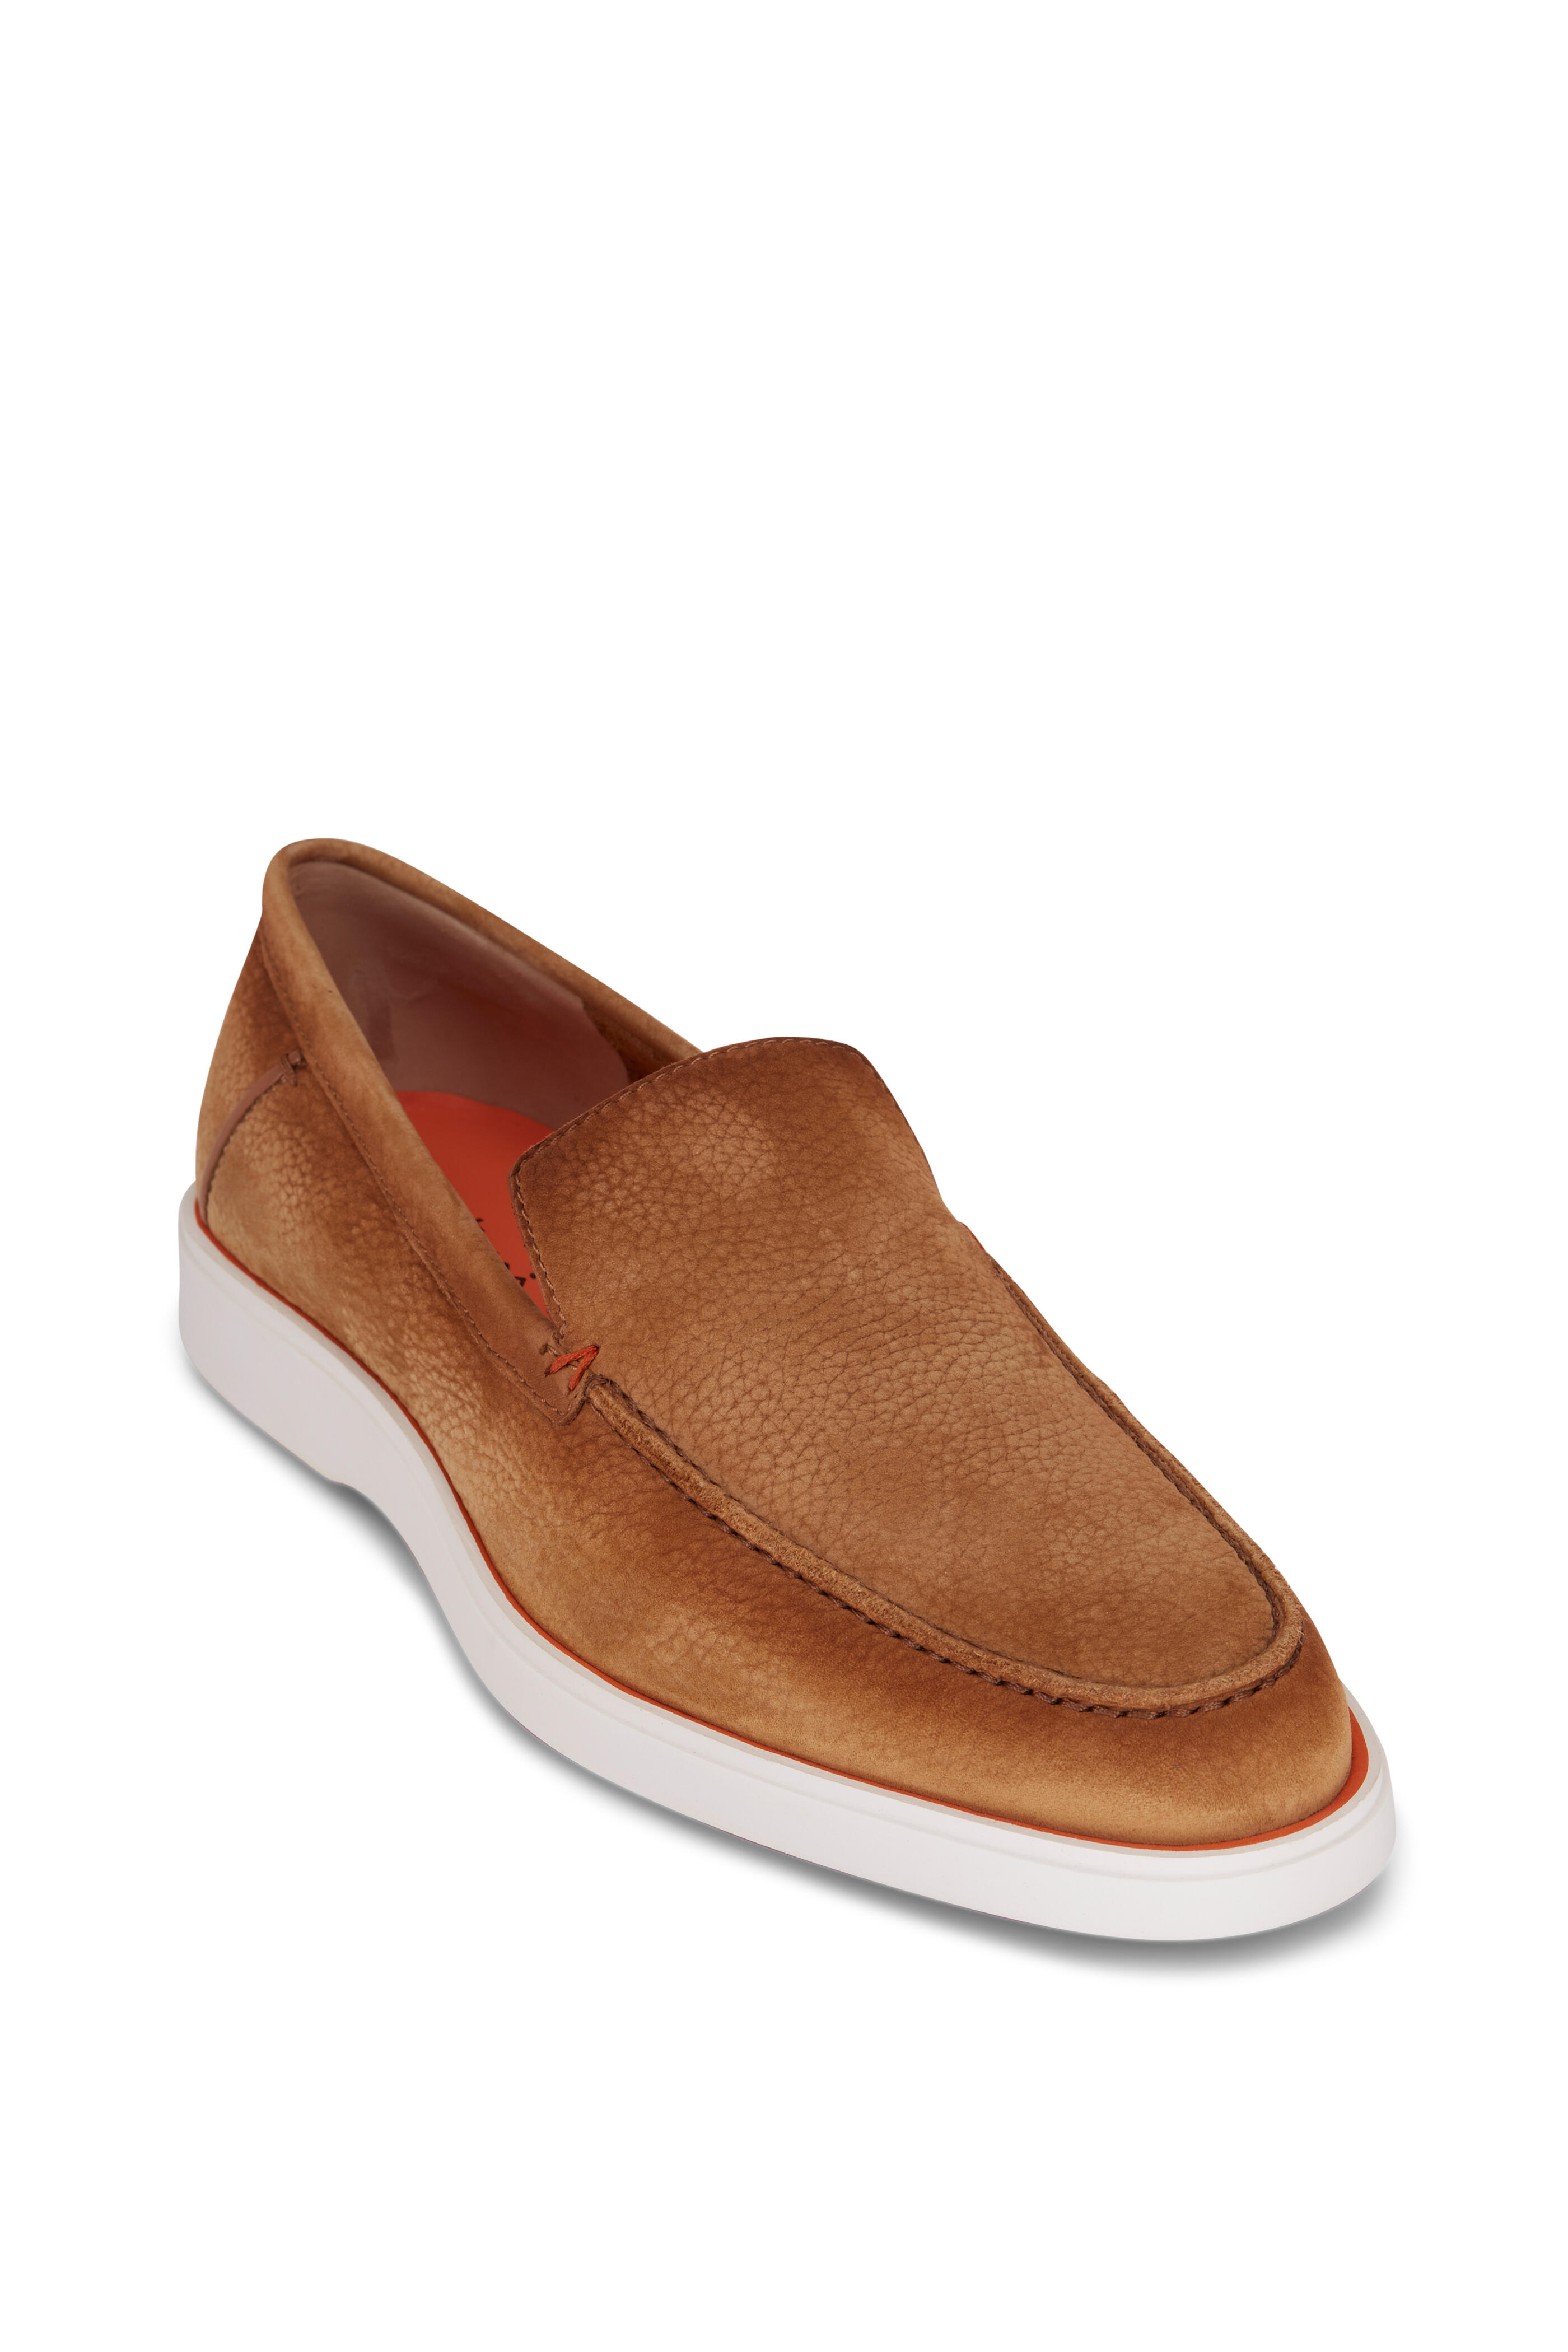 Santoni - Drain Suede Loafer | Mitchell Stores